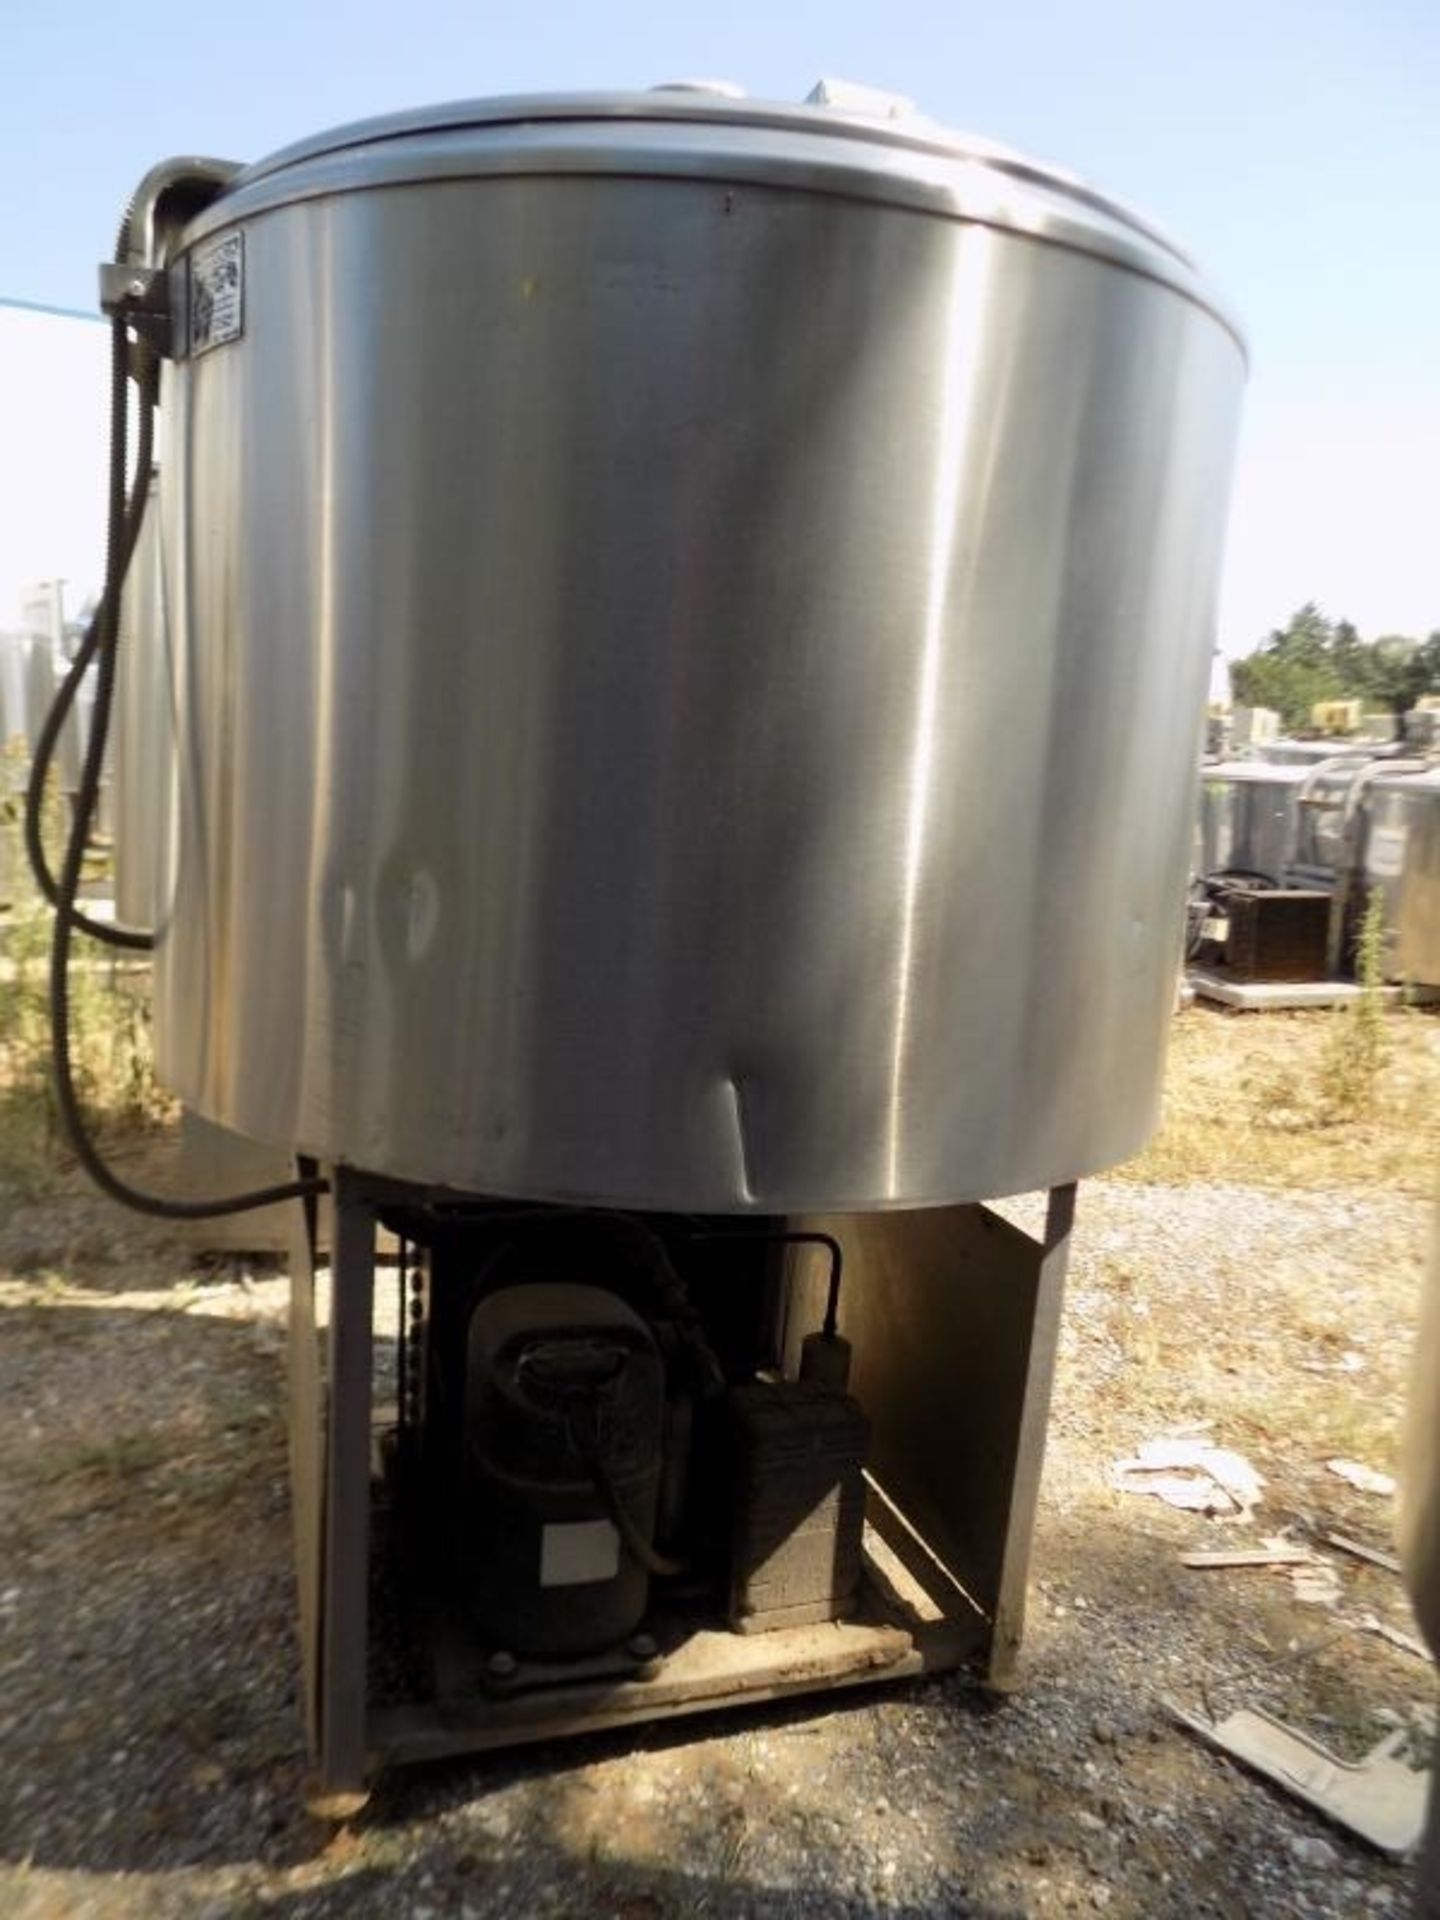 Ermicon (Packo) Aprox. 300 L/79 Gal. S/S Jacketed Farm Tank with Hinged Lid, Twin Blade Prop, - Image 4 of 4